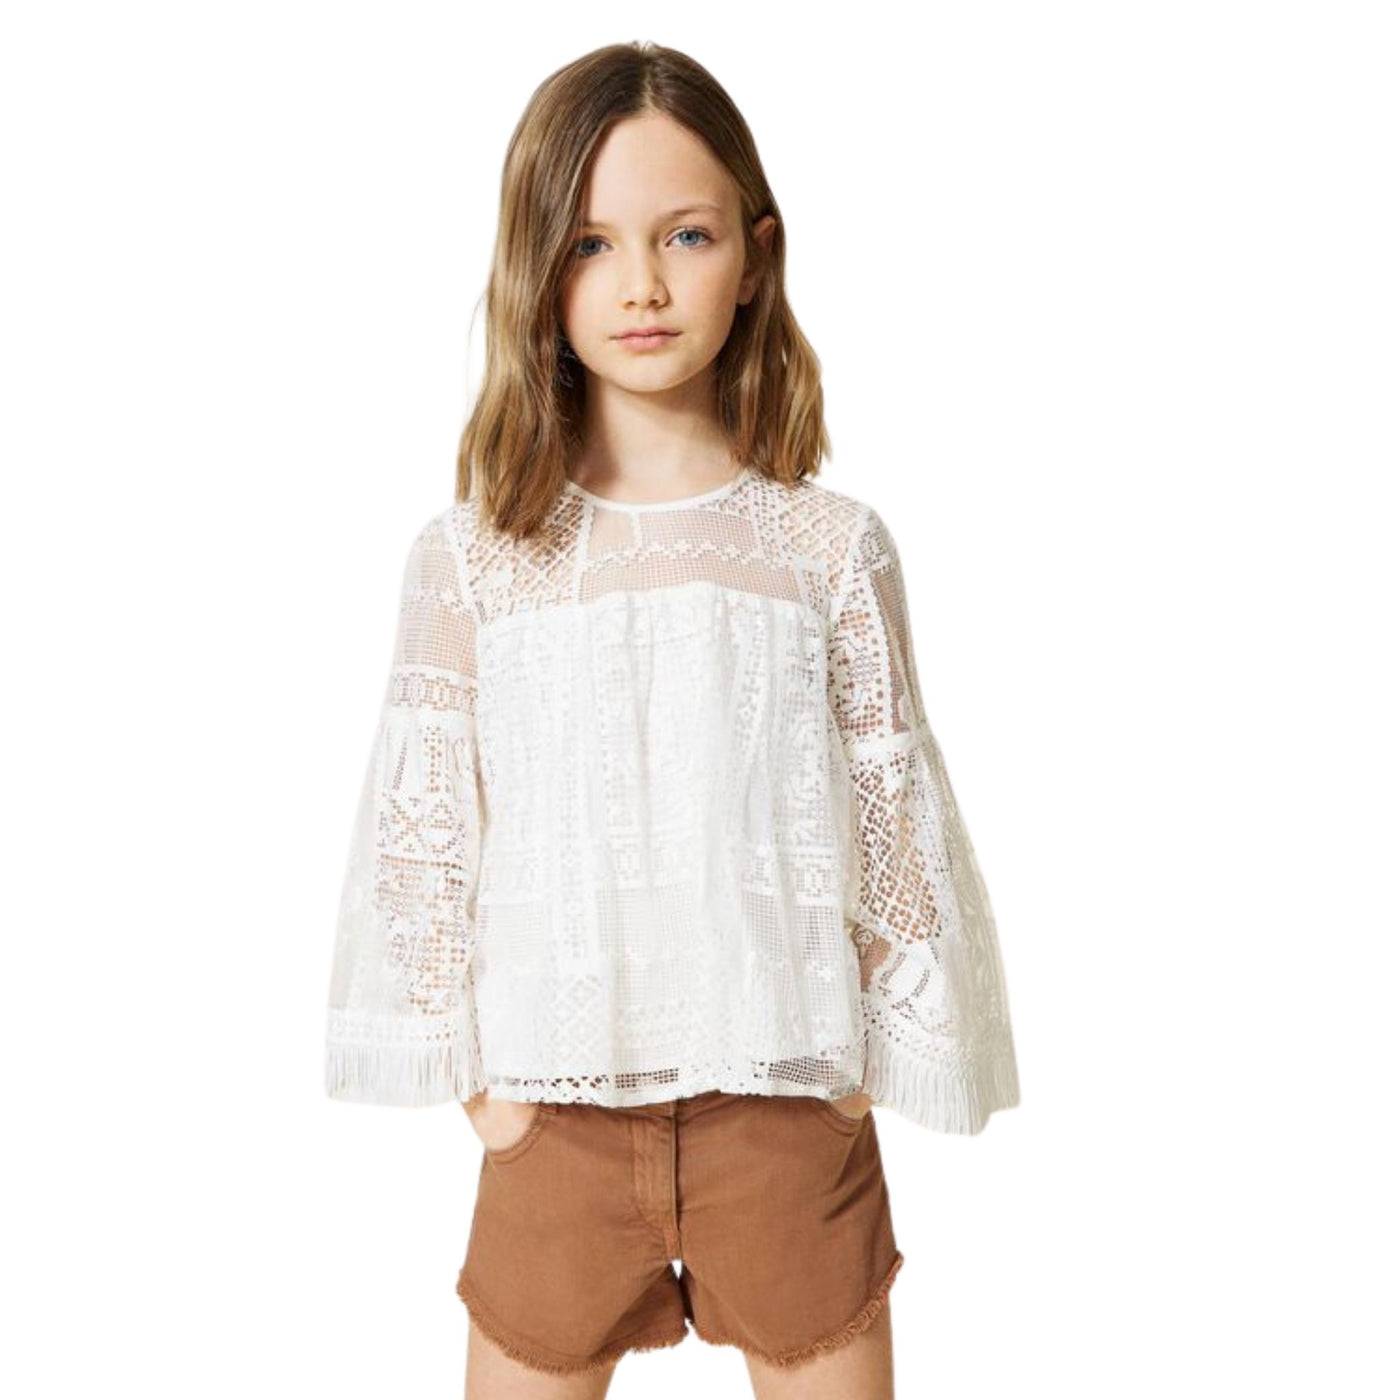 Blouse for girls 8-16 years in sangallo lace